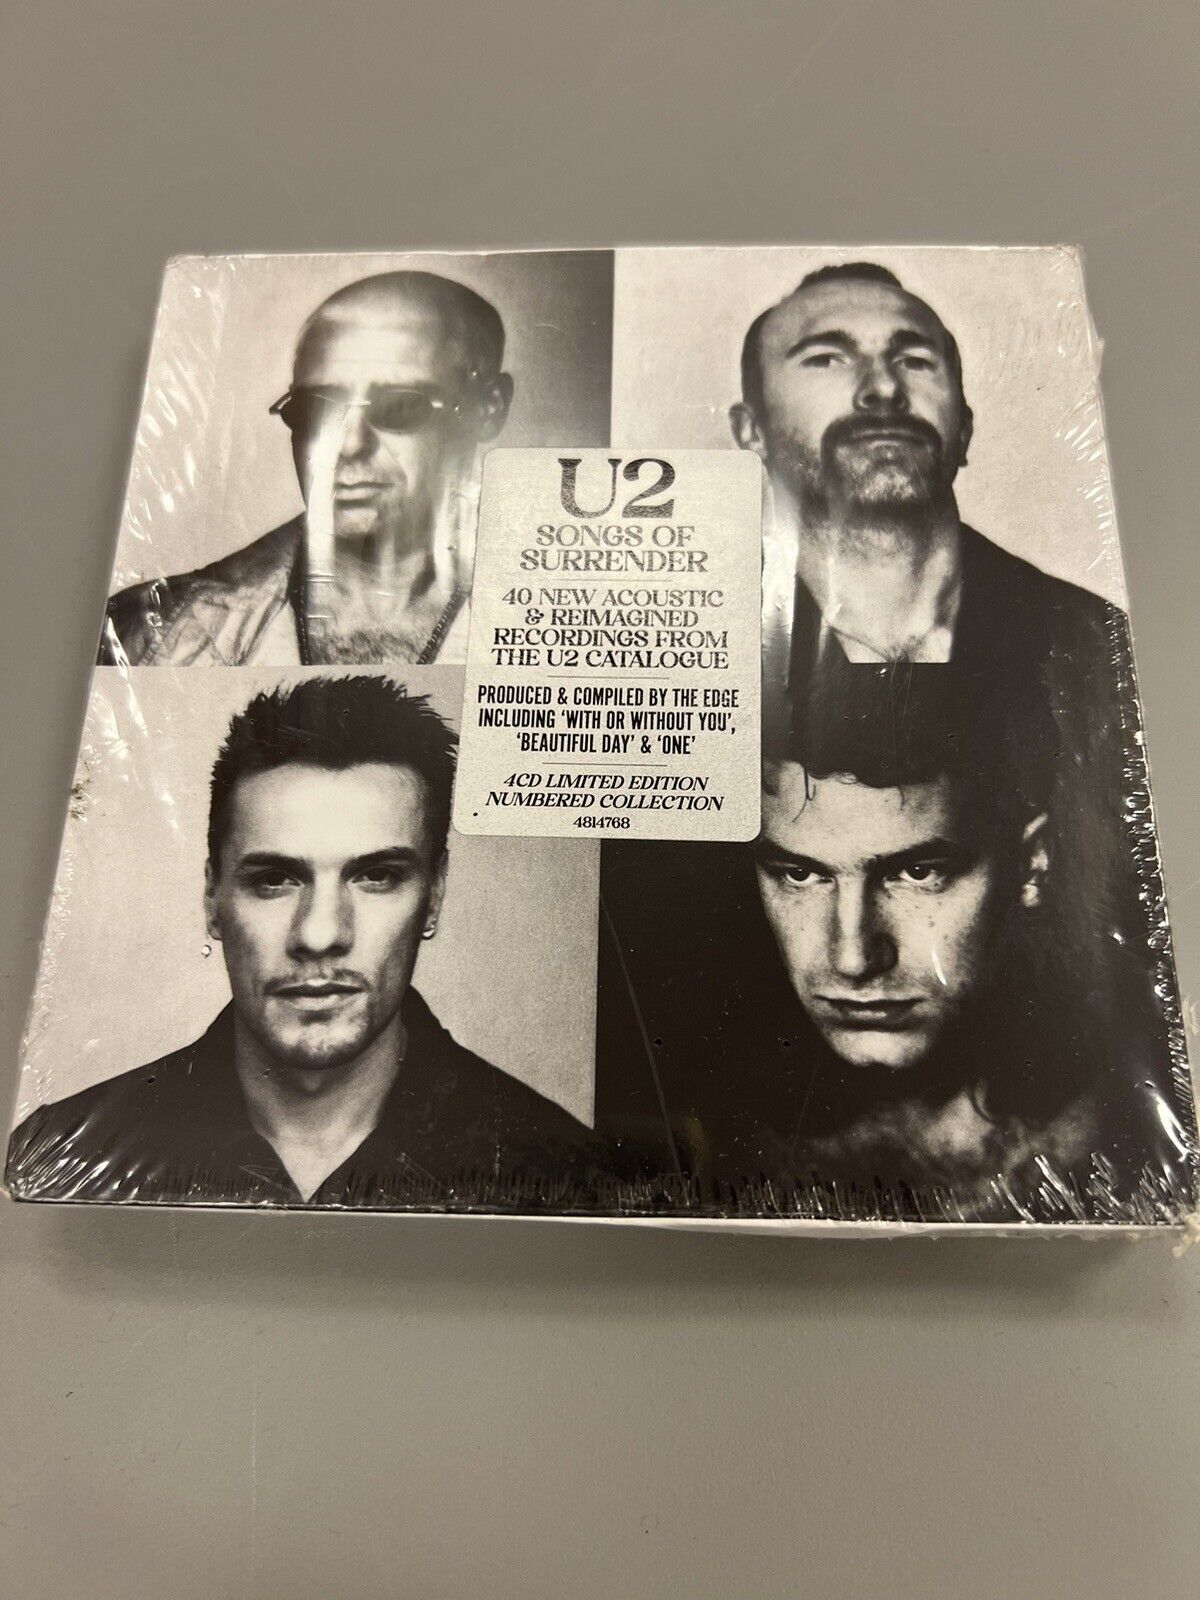 U2 SONGS OF SURRENDER 4 CD Limited Edition Numbered Collection New/Sealed damage